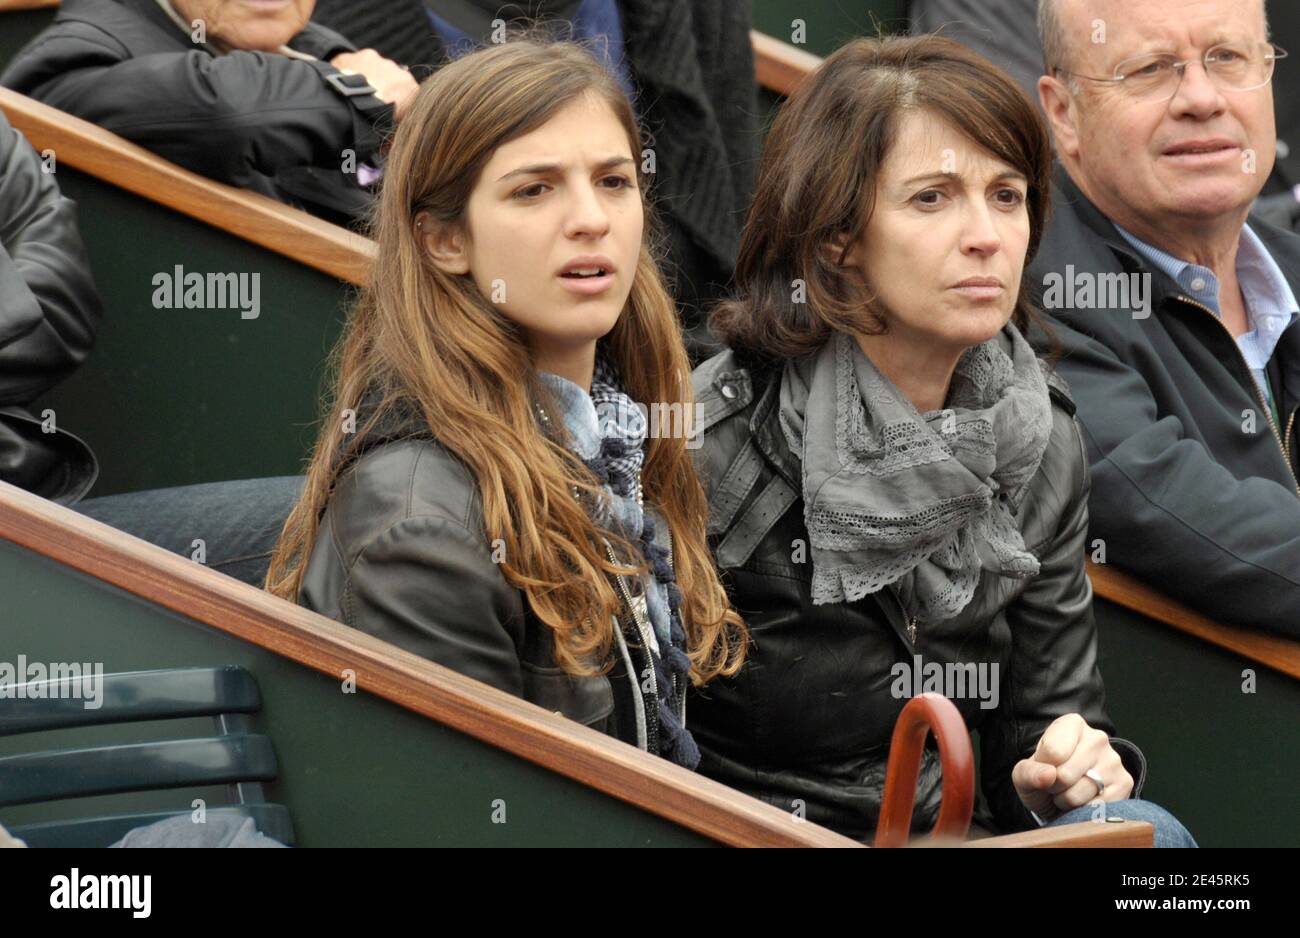 Zabou and her daughter attend the women's final match of the French Open, played at the Roland Garros stadium in Paris, France, on June 6, 2009. Russian's Svetlana Kuznetsova against Russian's Dinara Safina 6-4, 6-2. Photo by Giancarlo Gorassini/ABACAPRESS.COM Stock Photo